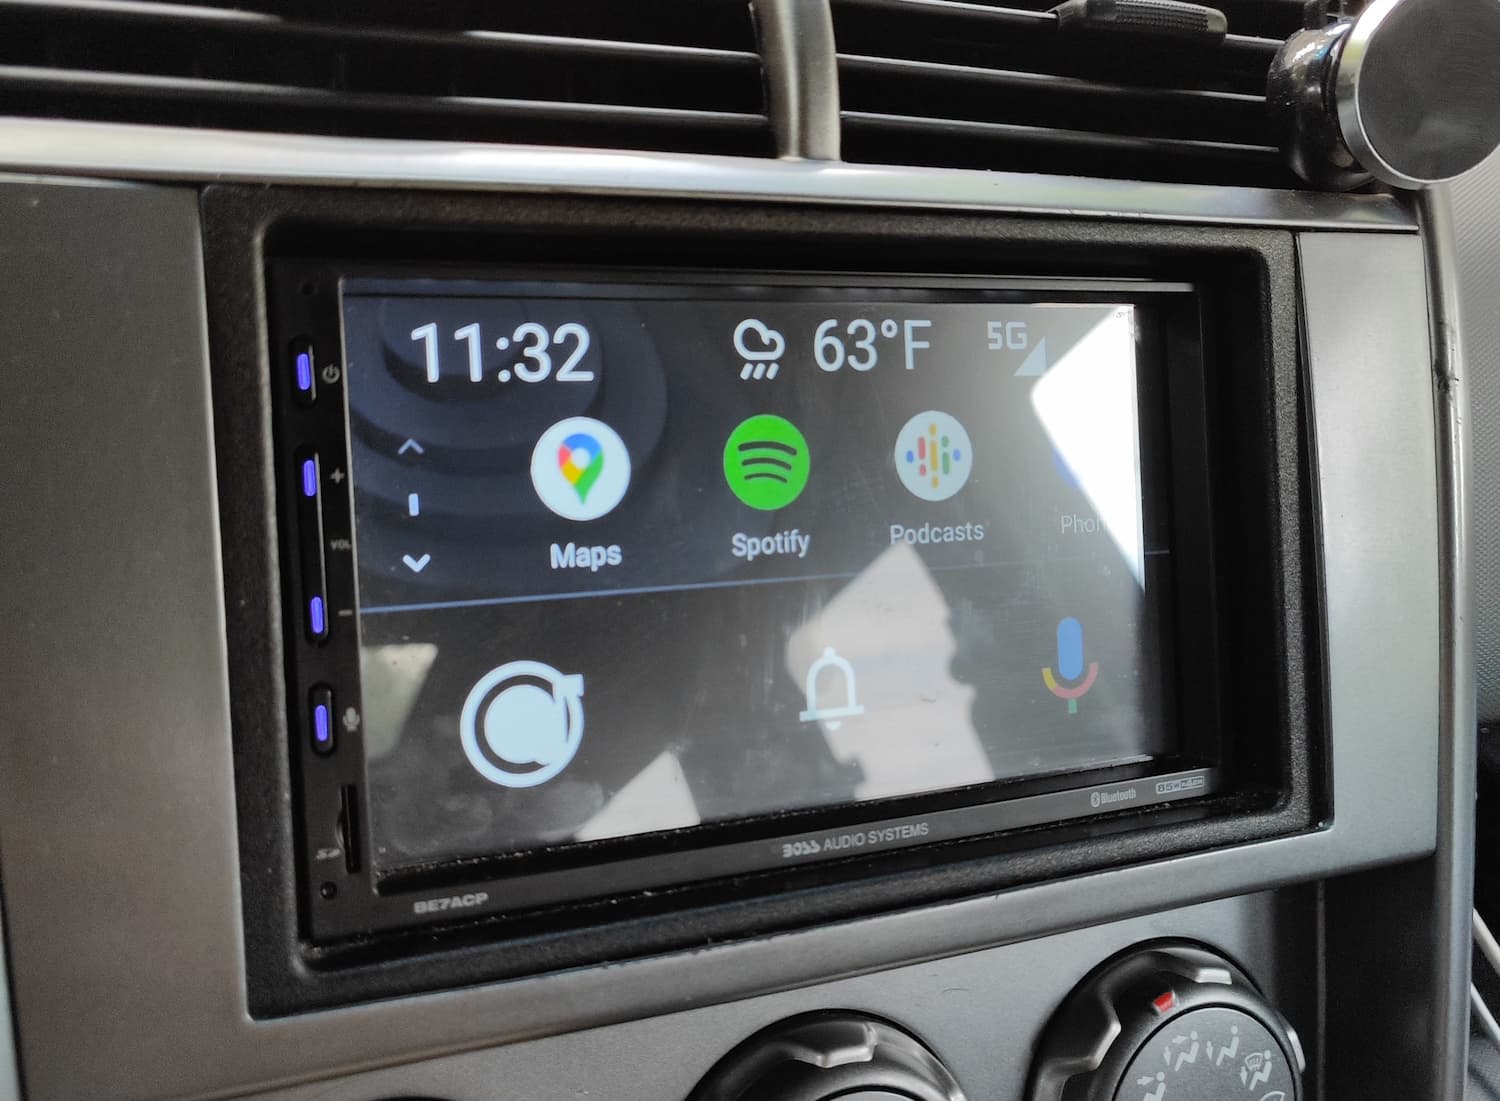 android auto huge icons issue